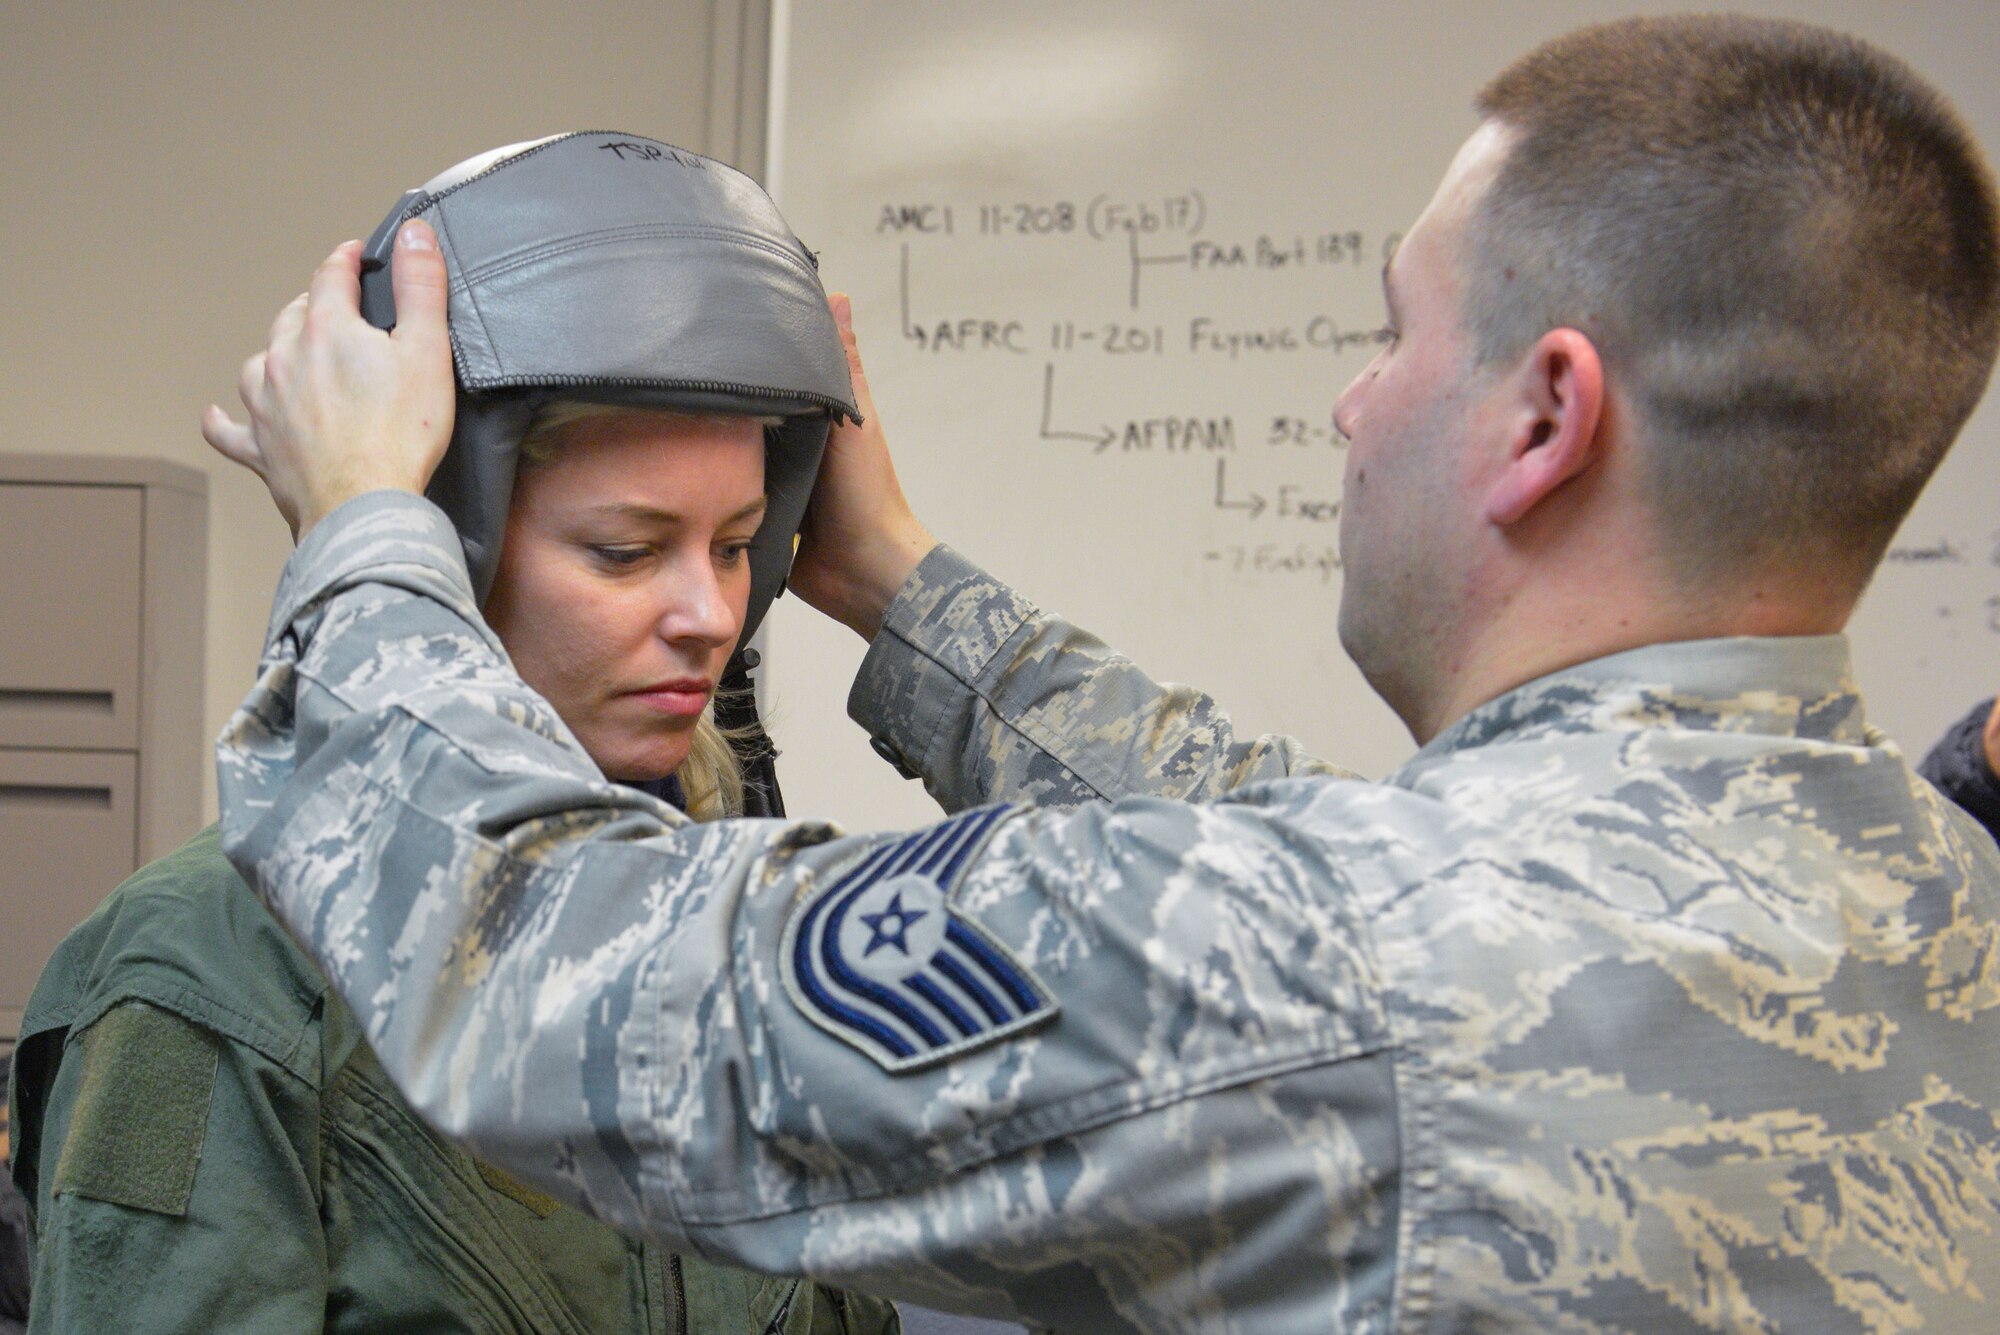 Tech Sgt. Brandon Blankensop, an Aircrew Flight Equipment Lead Trainer from the 20th Operations Support Squadron at Shaw Air Force Base, S.C., helps fit actress Elizabeth Banks with a helmet prior to her flight on an F-16 Fighting Falcon at the Minneapolis-St. Paul Air Reserve Station, Minn., Feb. 3, 2018. Banks' flight was one of many offered this week by the Viper Demo team prior to their fly-over for Super Bowl LII. (U.S. Air Force photo by Master Sgt. Eric Amidon)